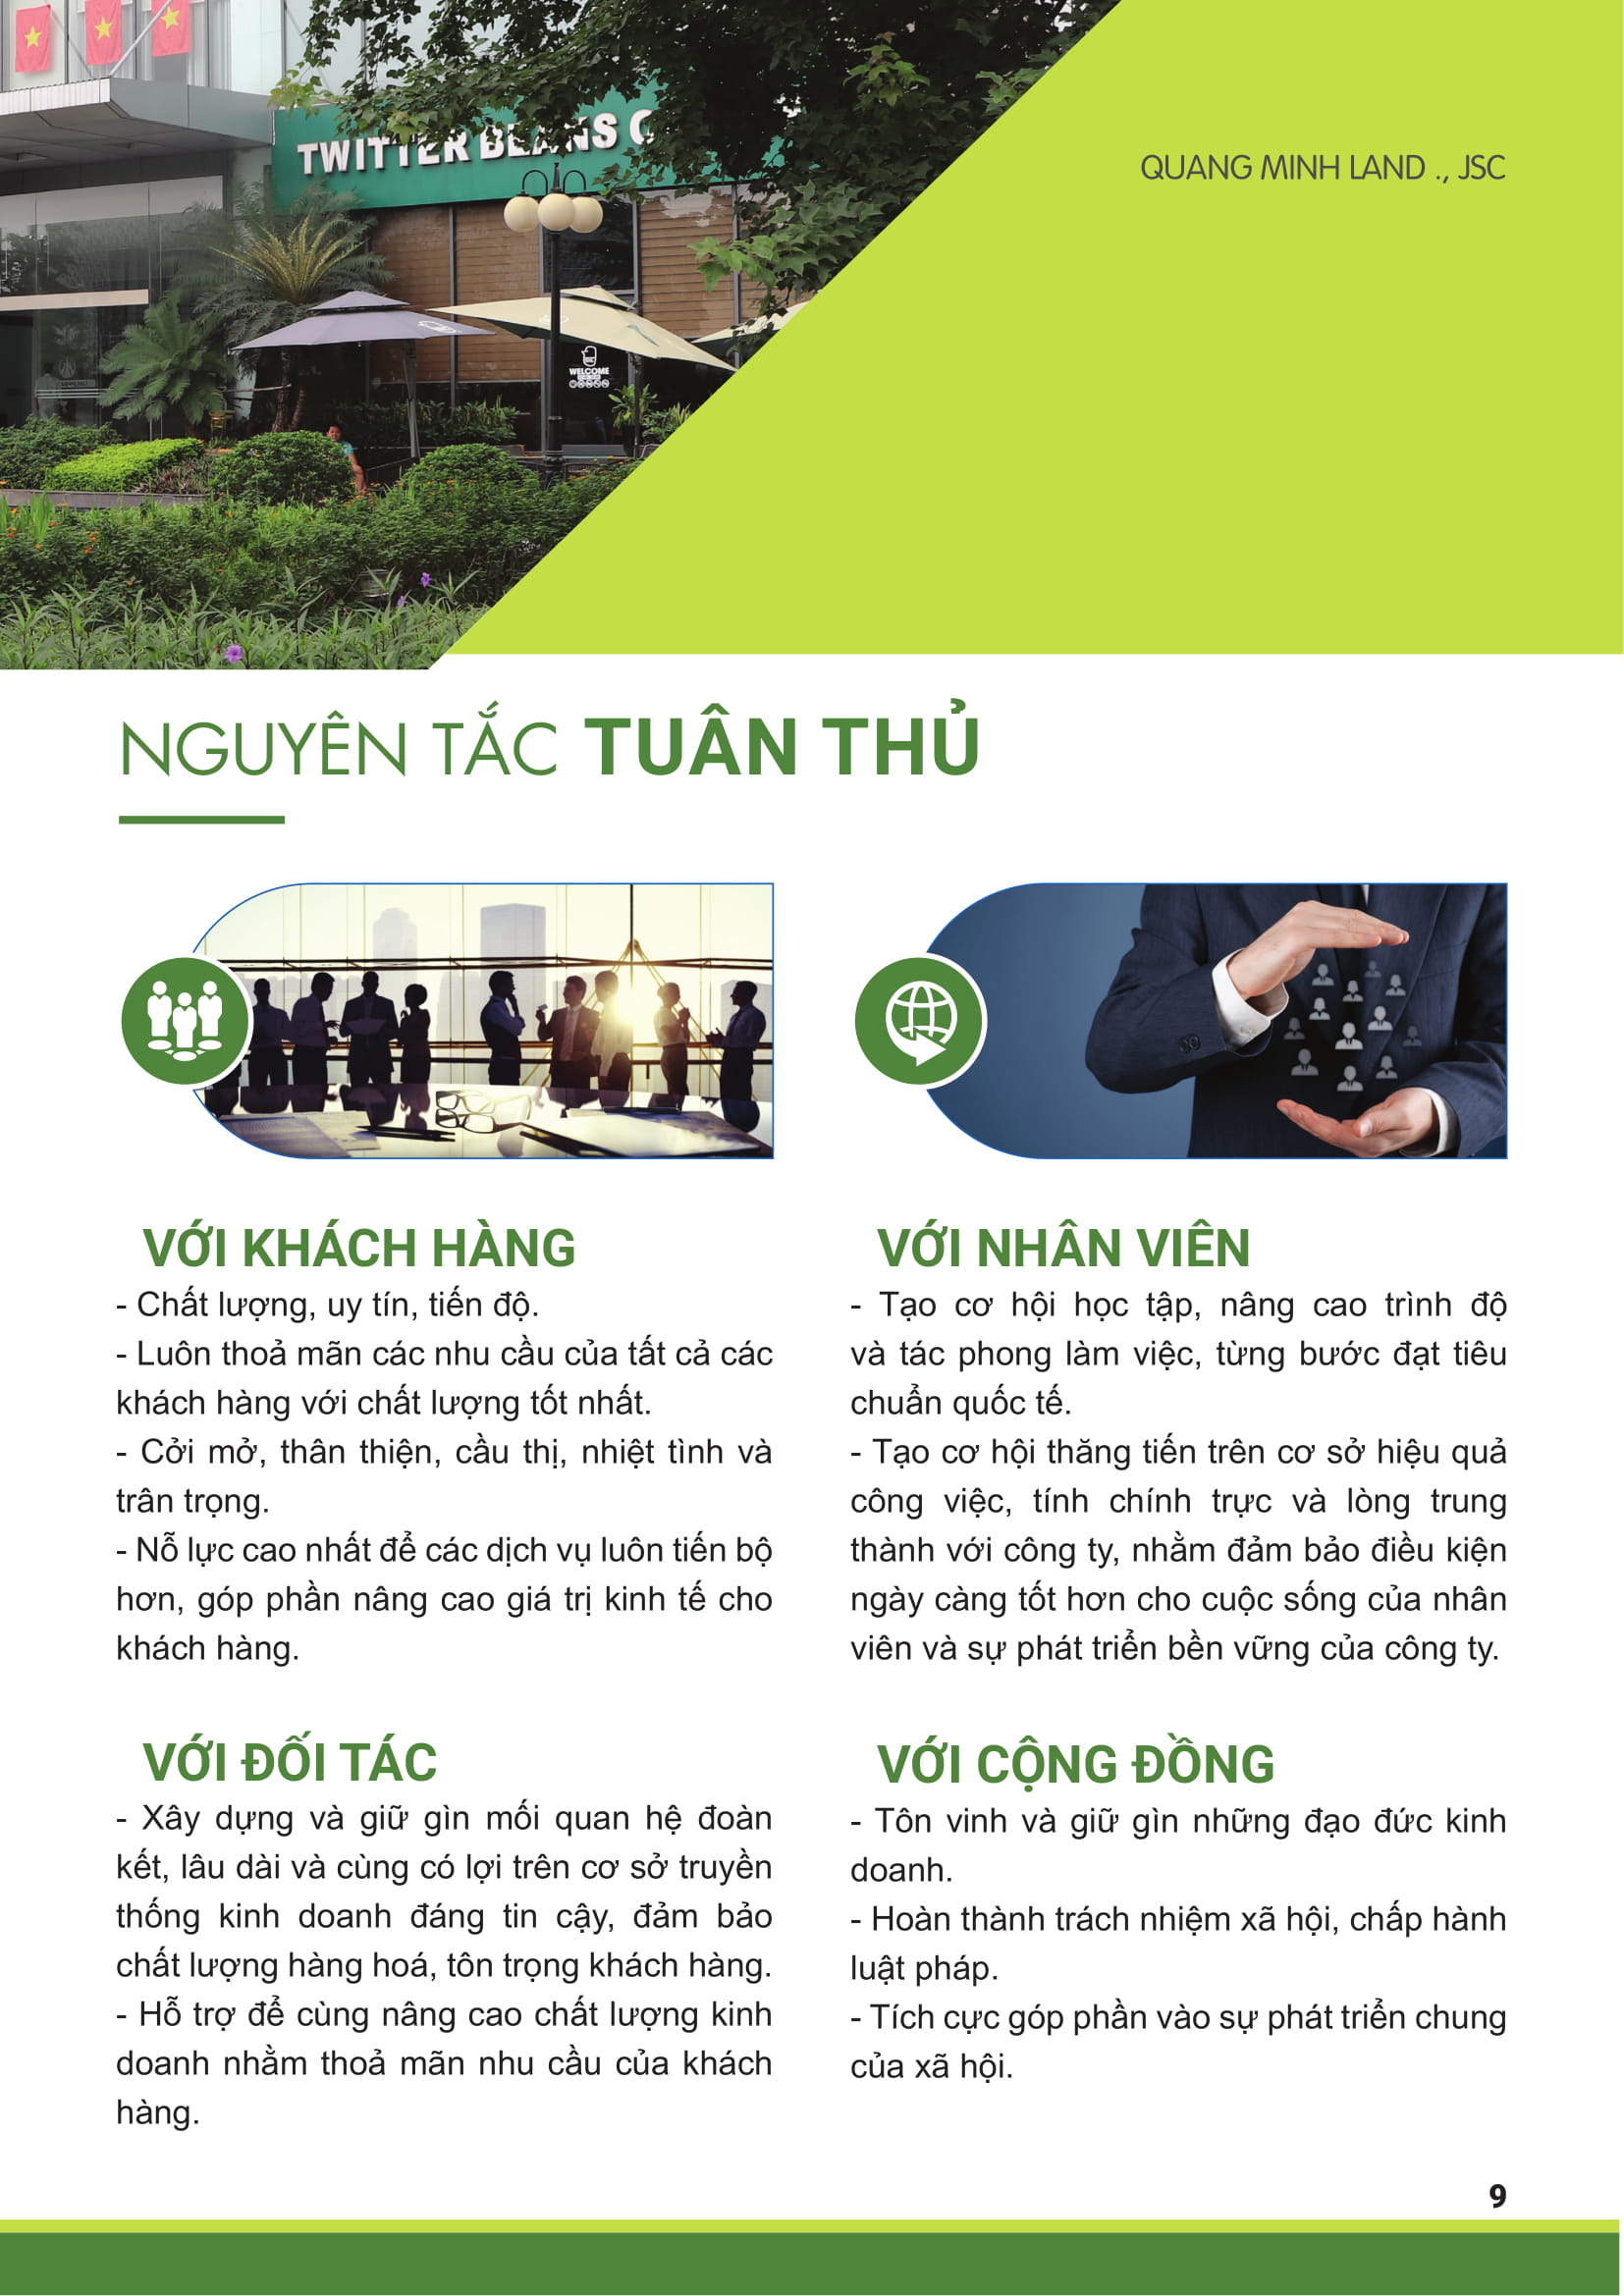 hsnl_cty_quang_minh_in09